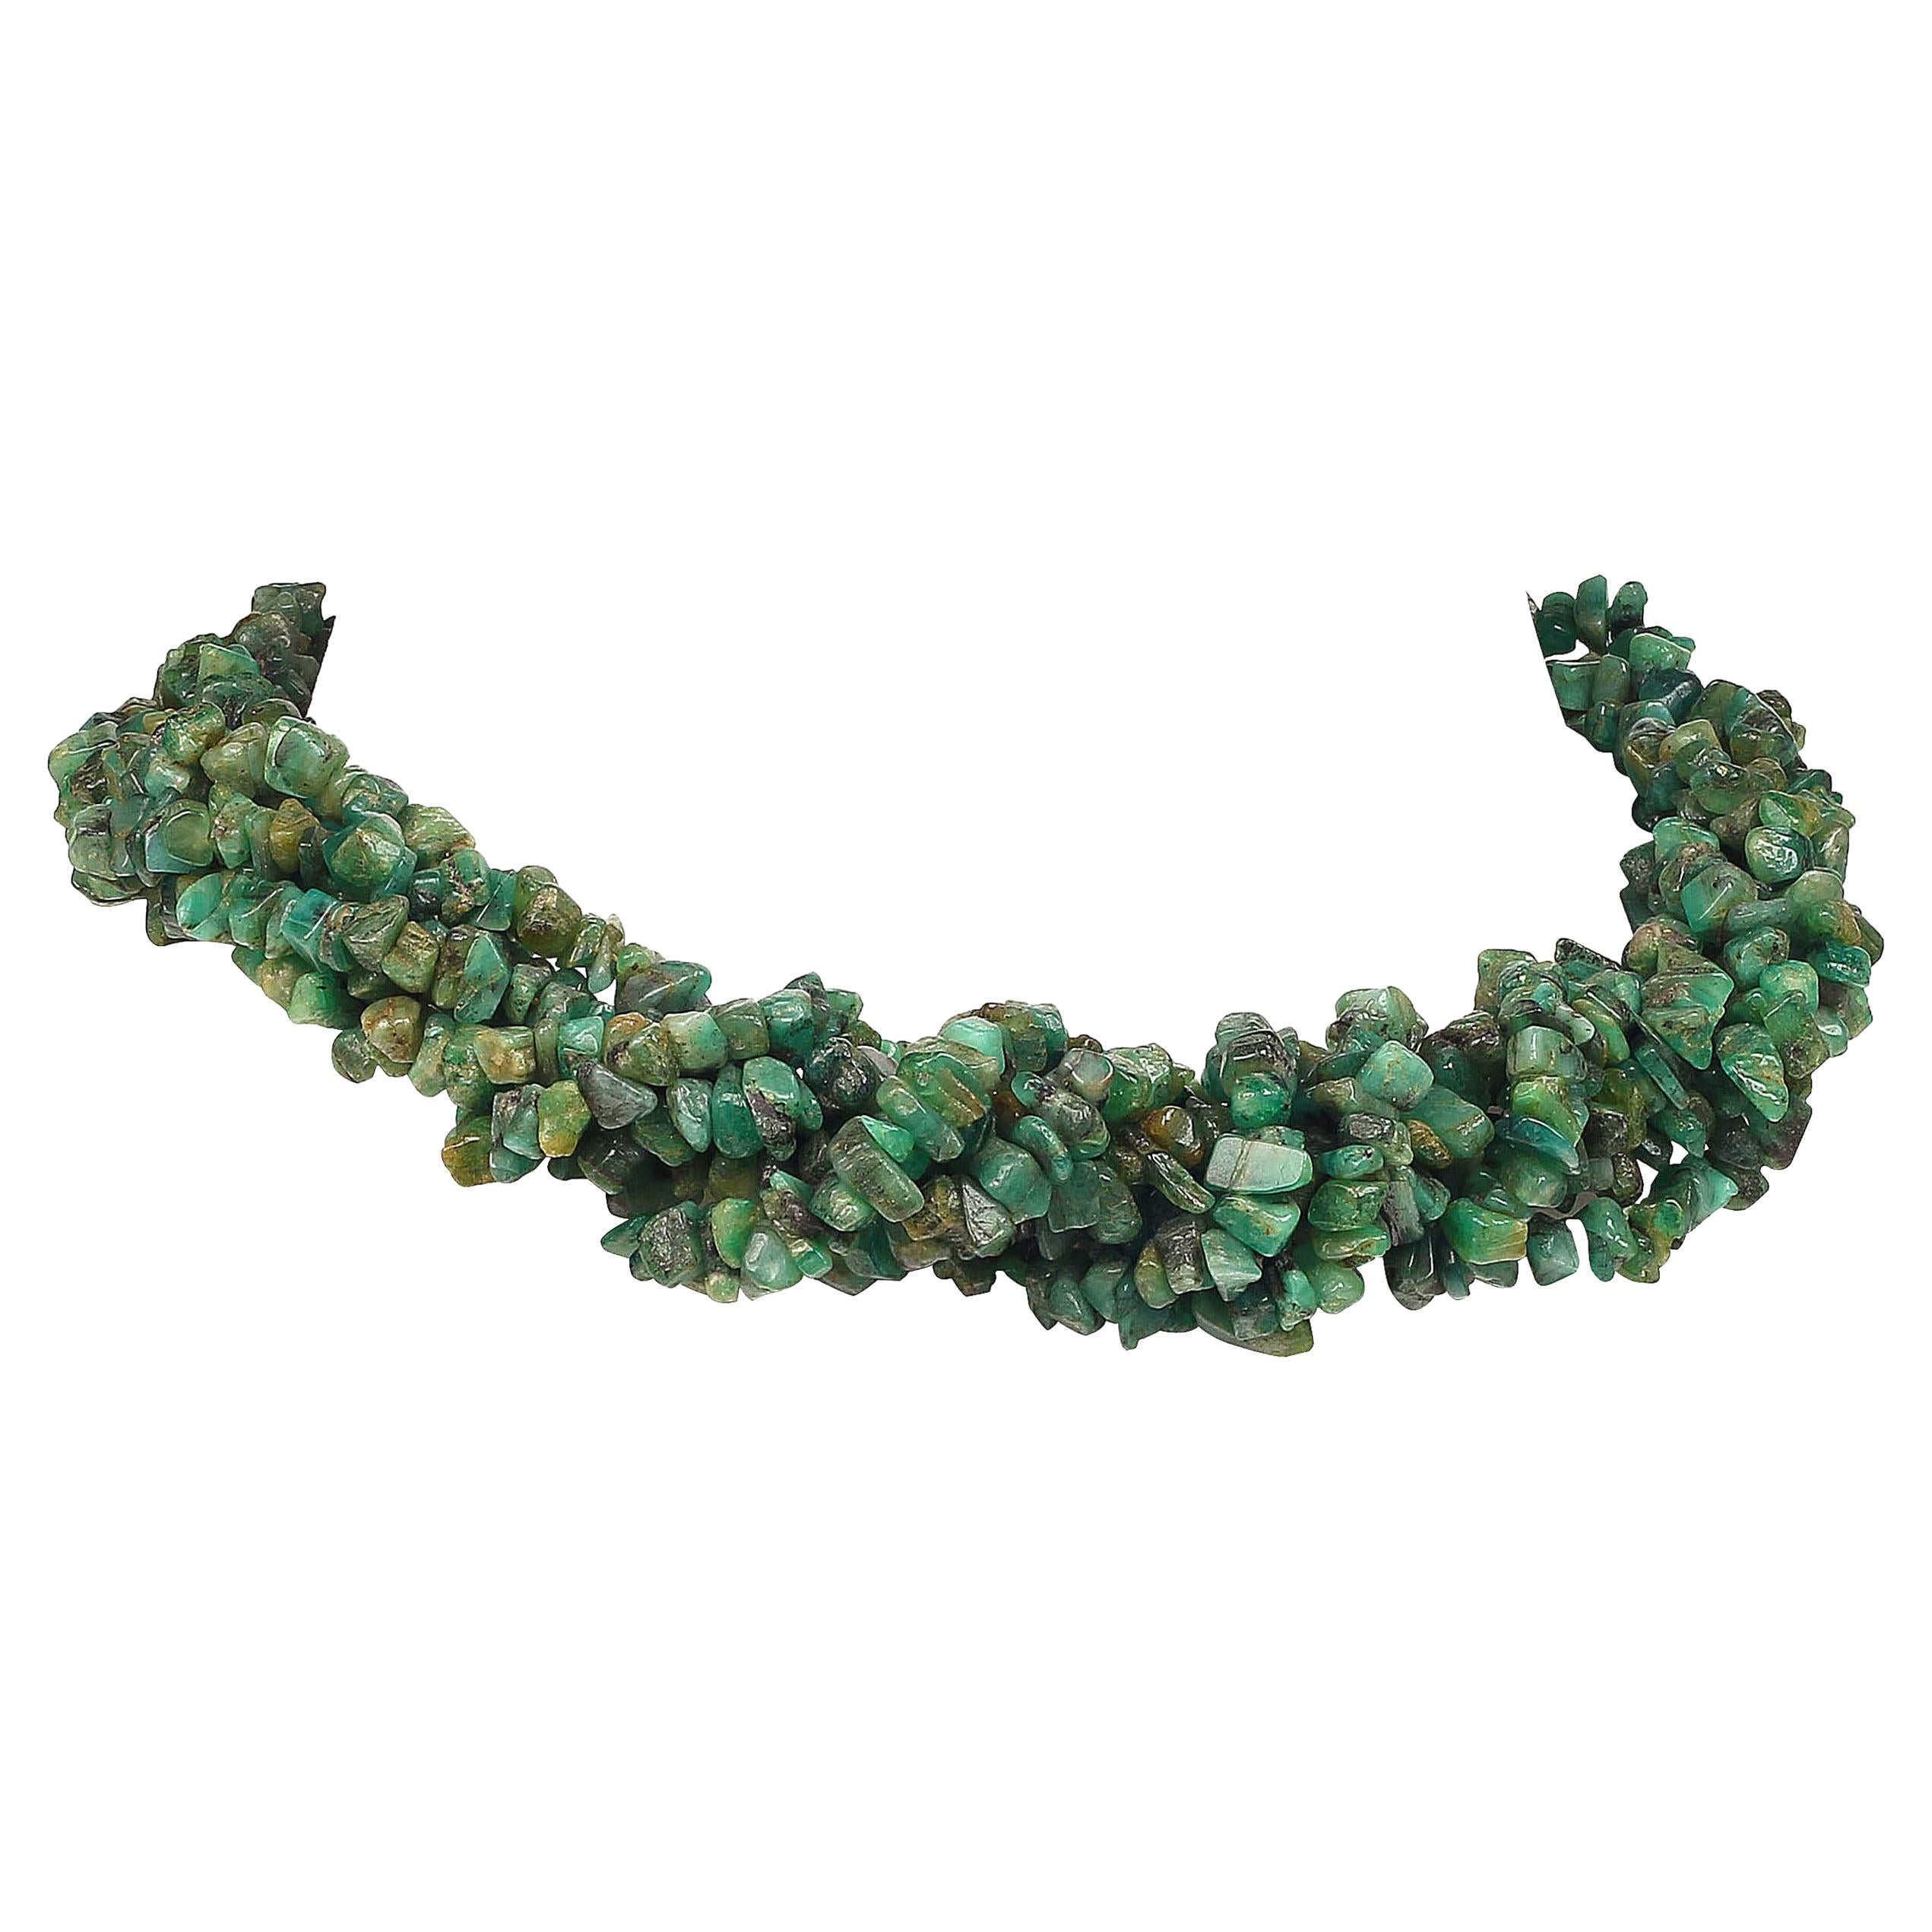 Emerald chip necklace consisting of three 34